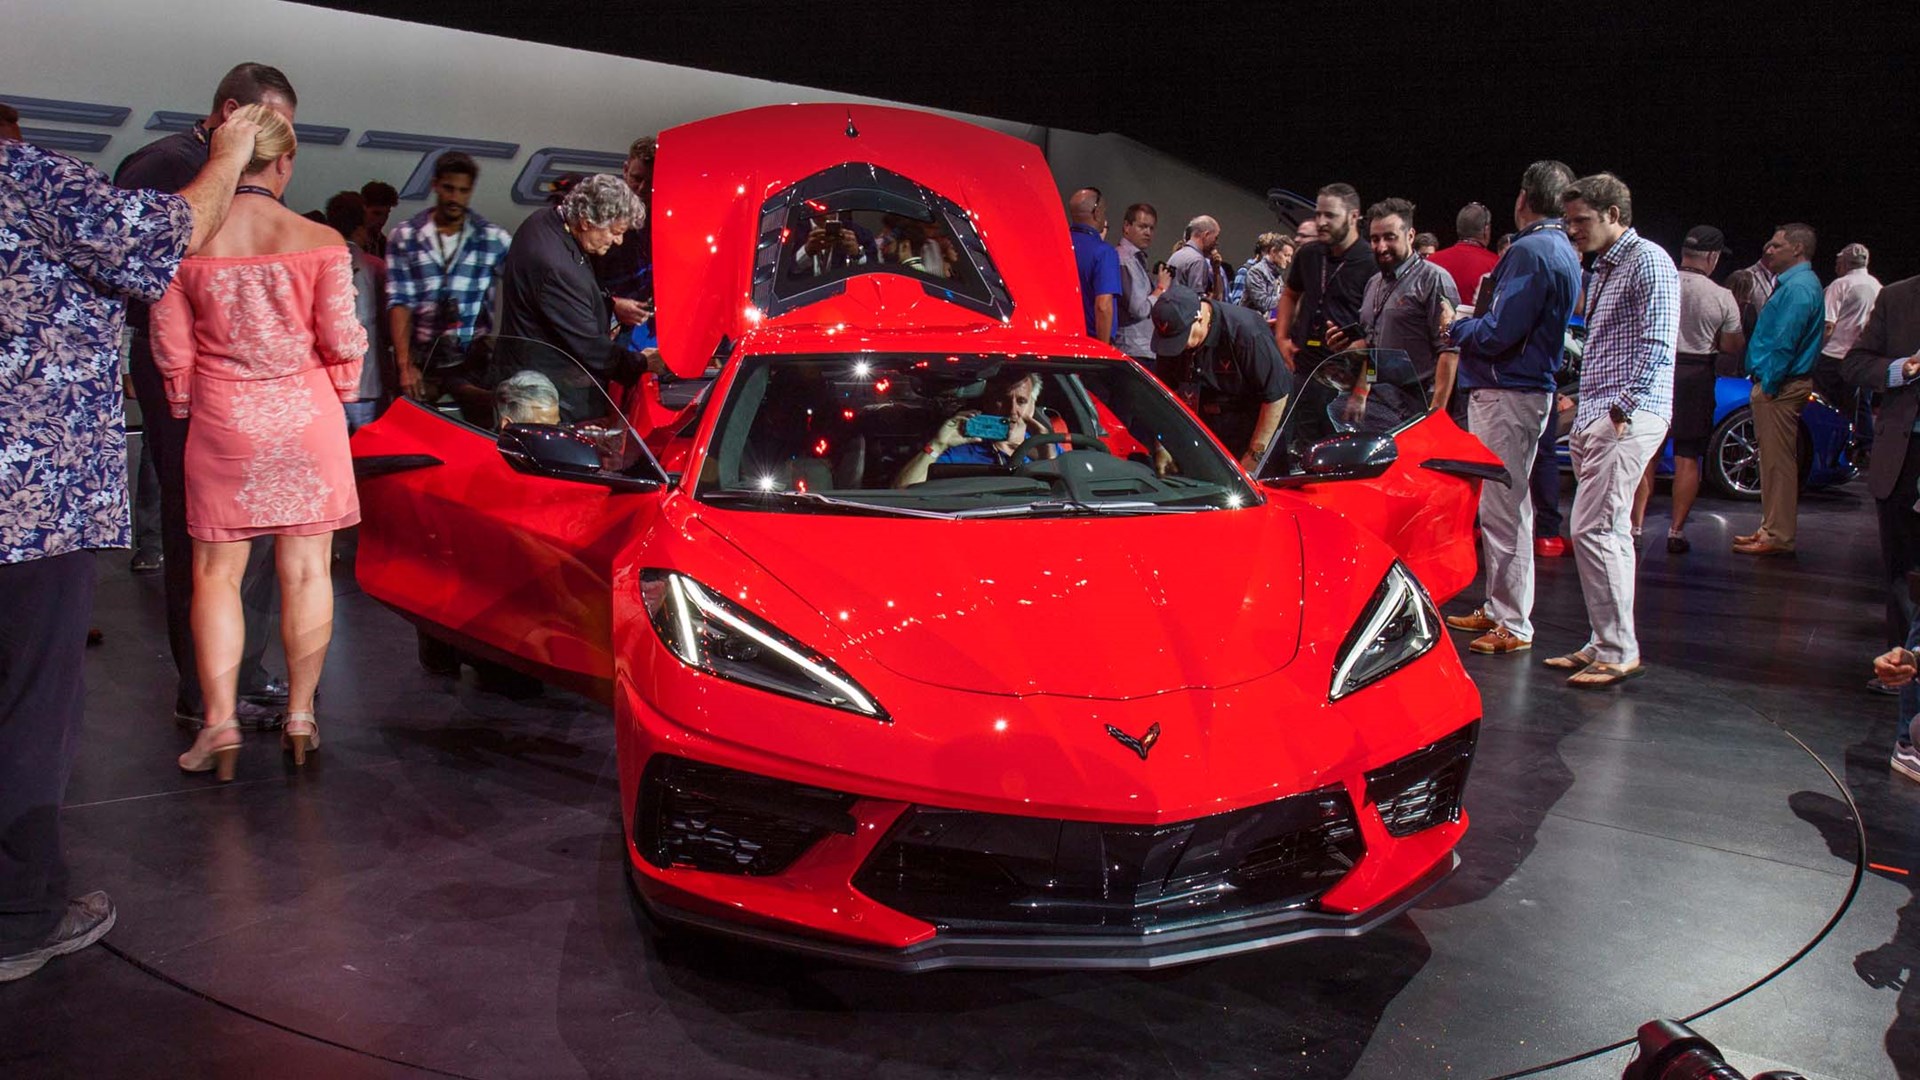 The 2020 Mid-Engine Corvette at the unveiling event on July 18, 2019.